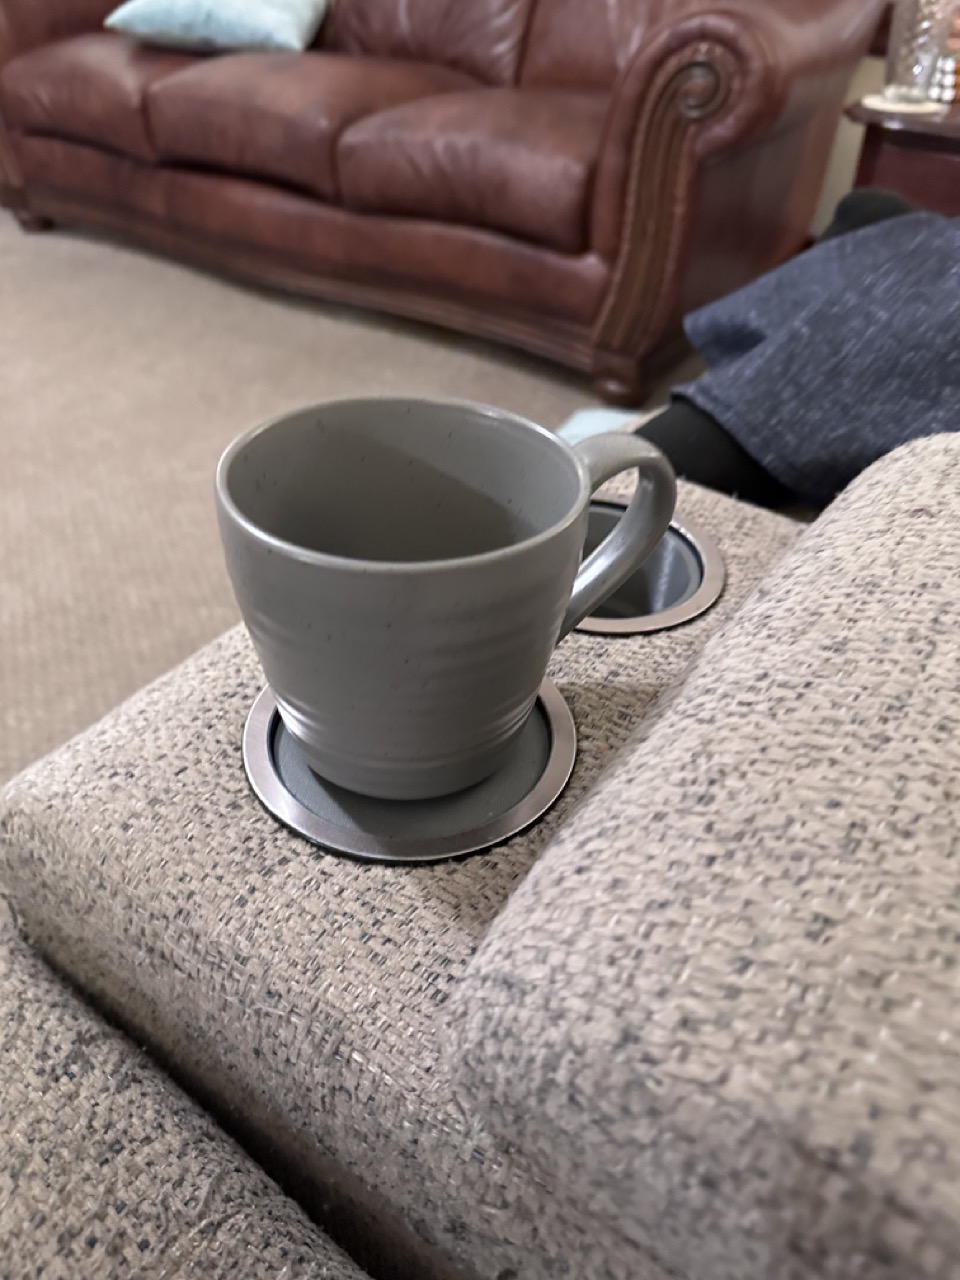 Couch Cupholder Mug Riser by TechInDepth, Download free STL model